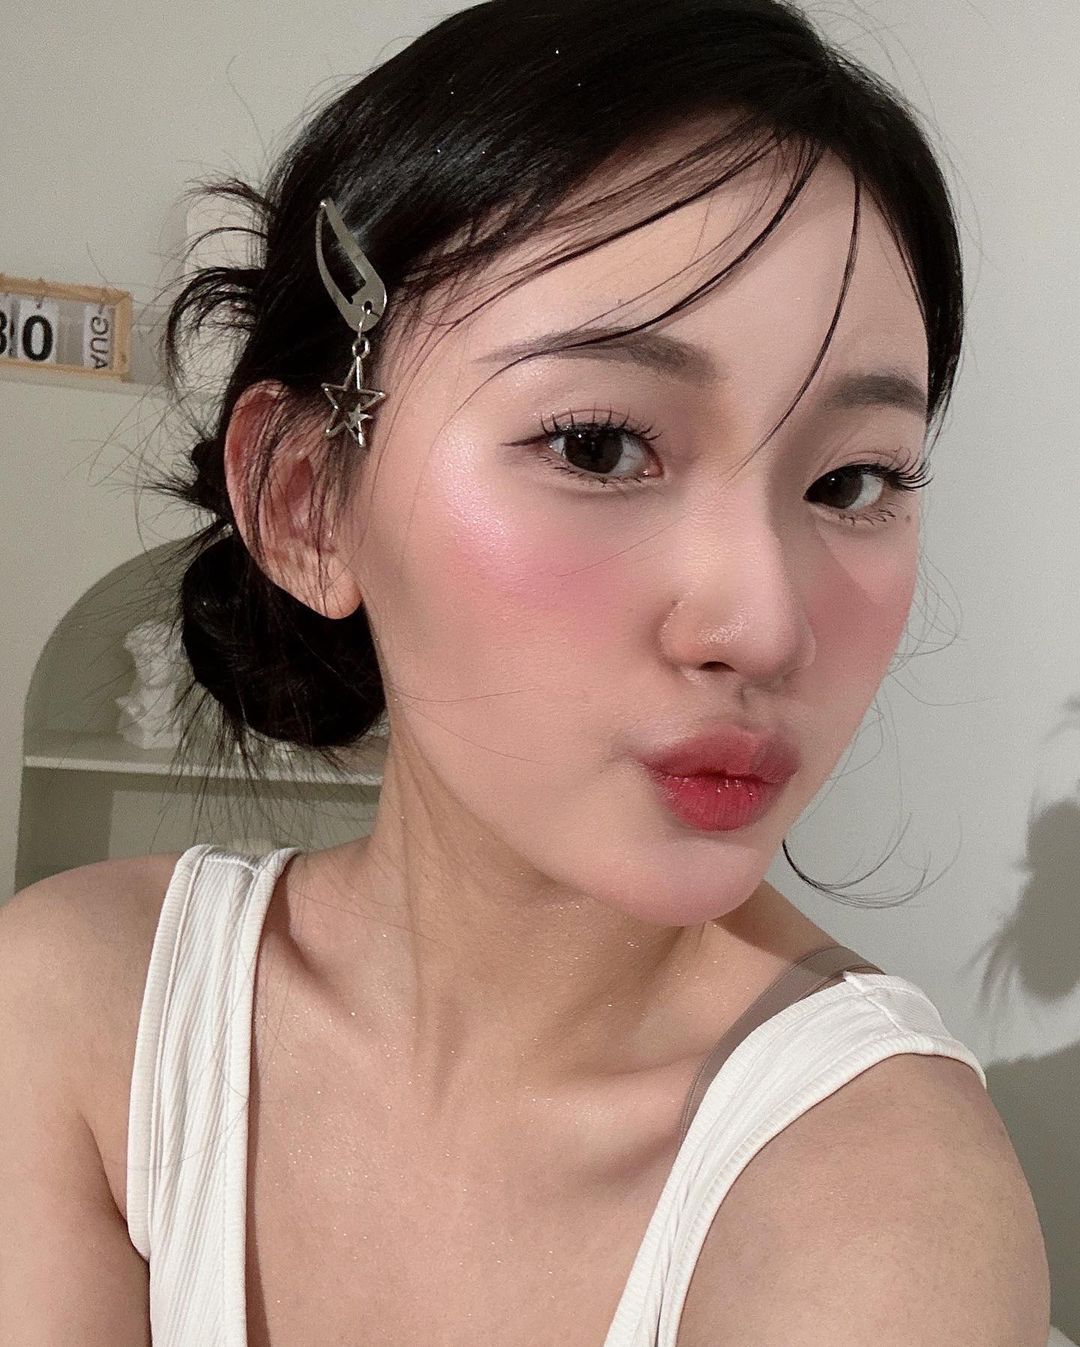 The Japanese Igari Makeup Trend Is Irresistibly Cute